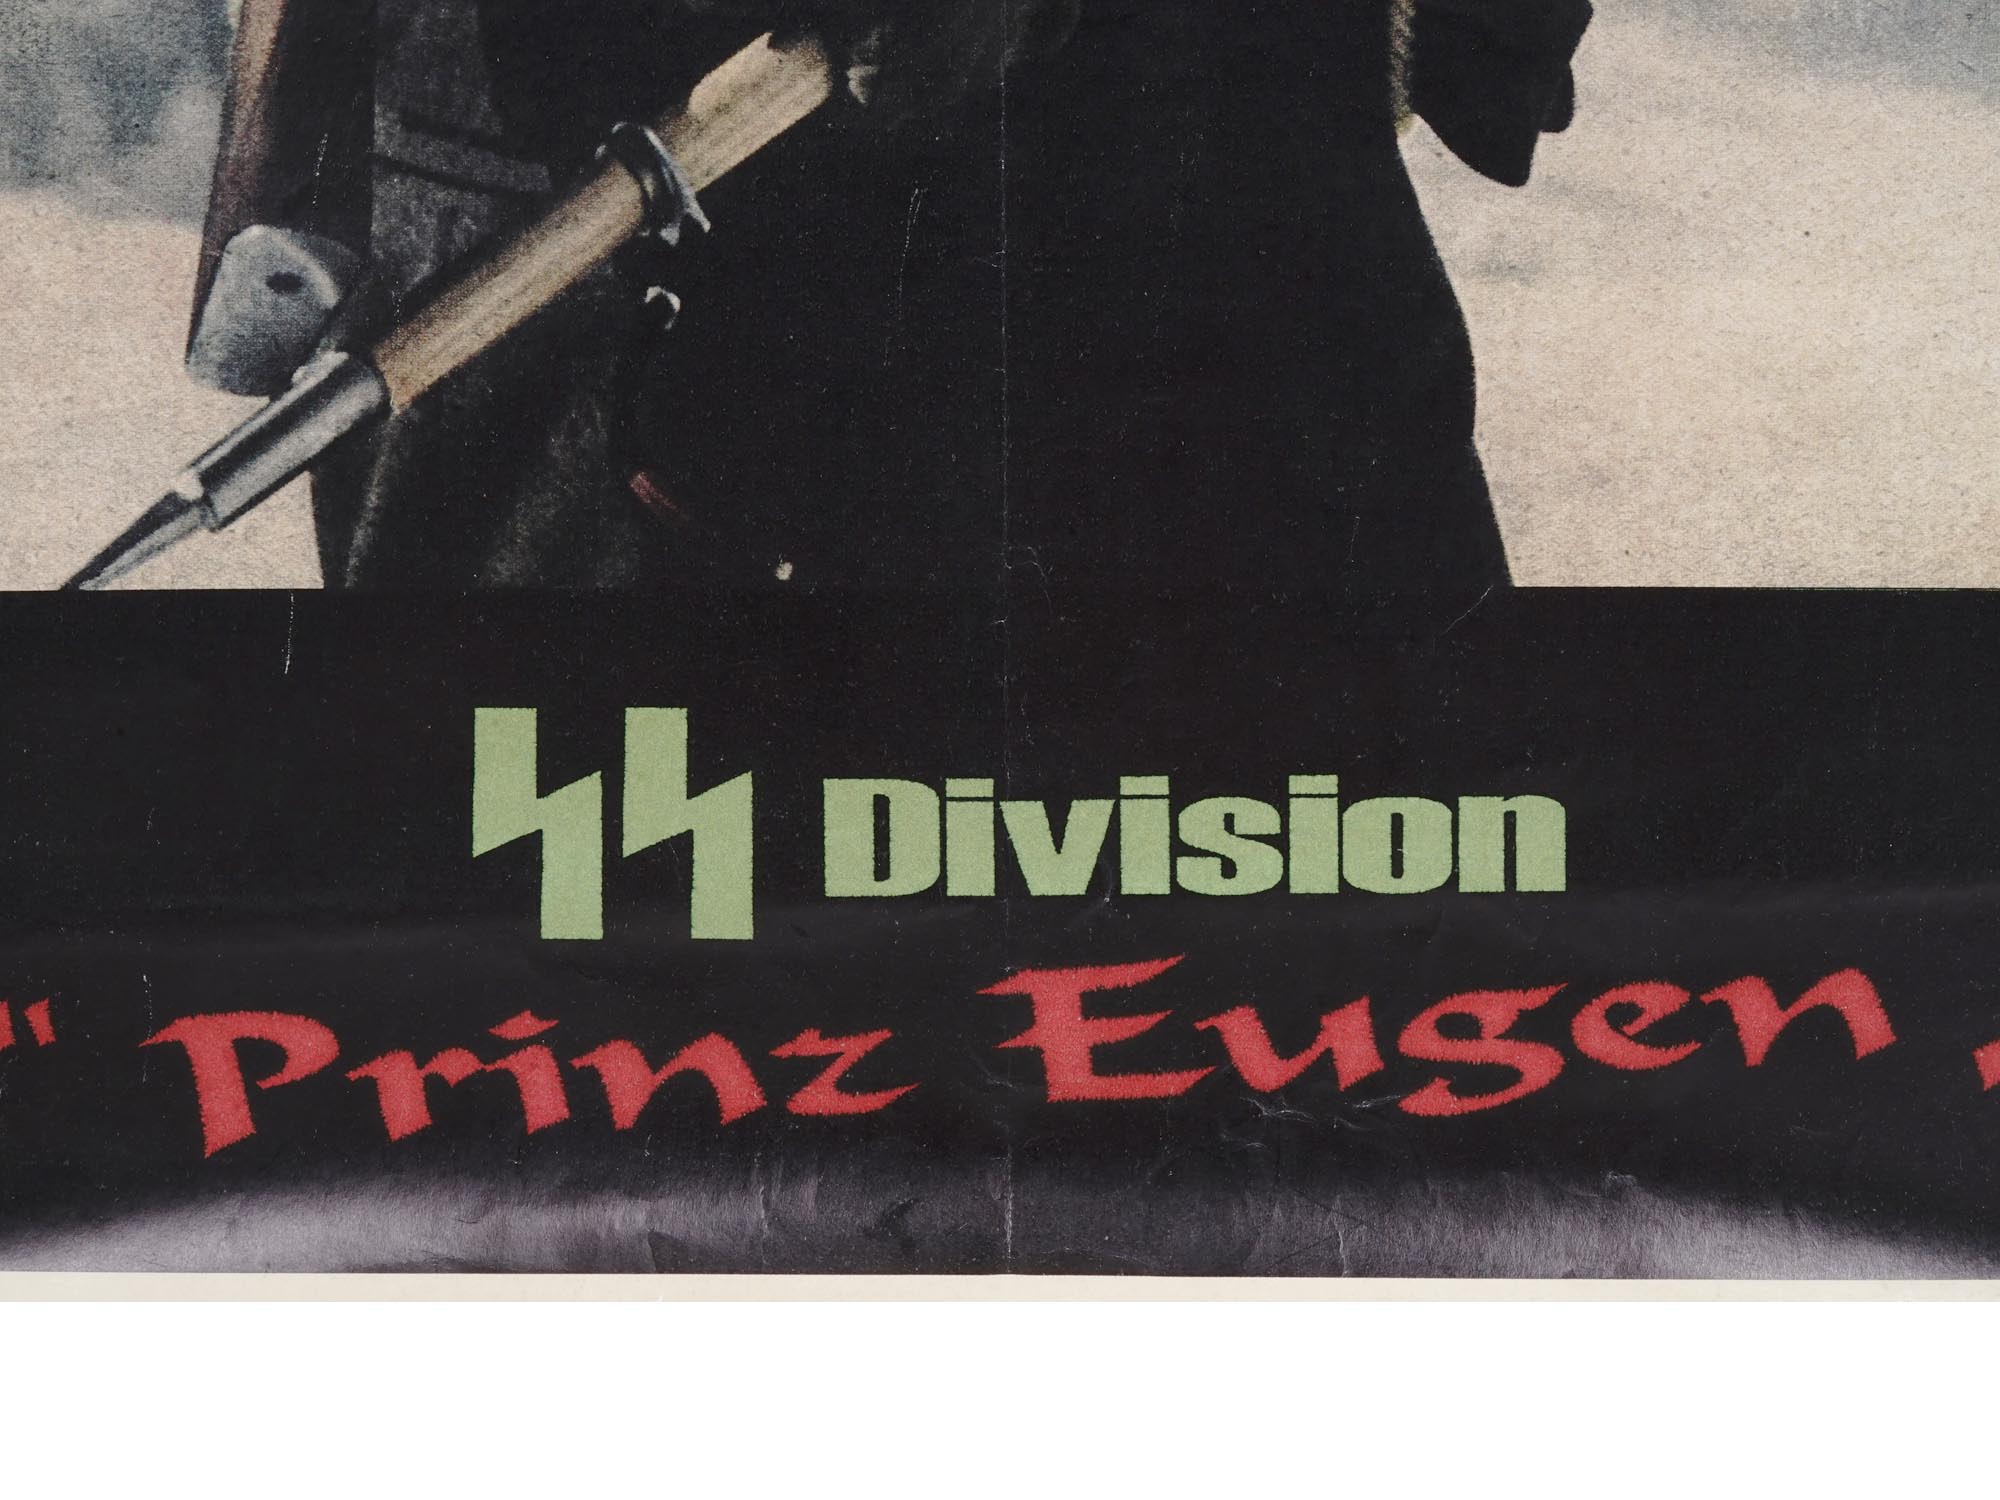 WWII NAZI GERMAN POSTER OF SS DIVISION PRINZ EUGEN PIC-3